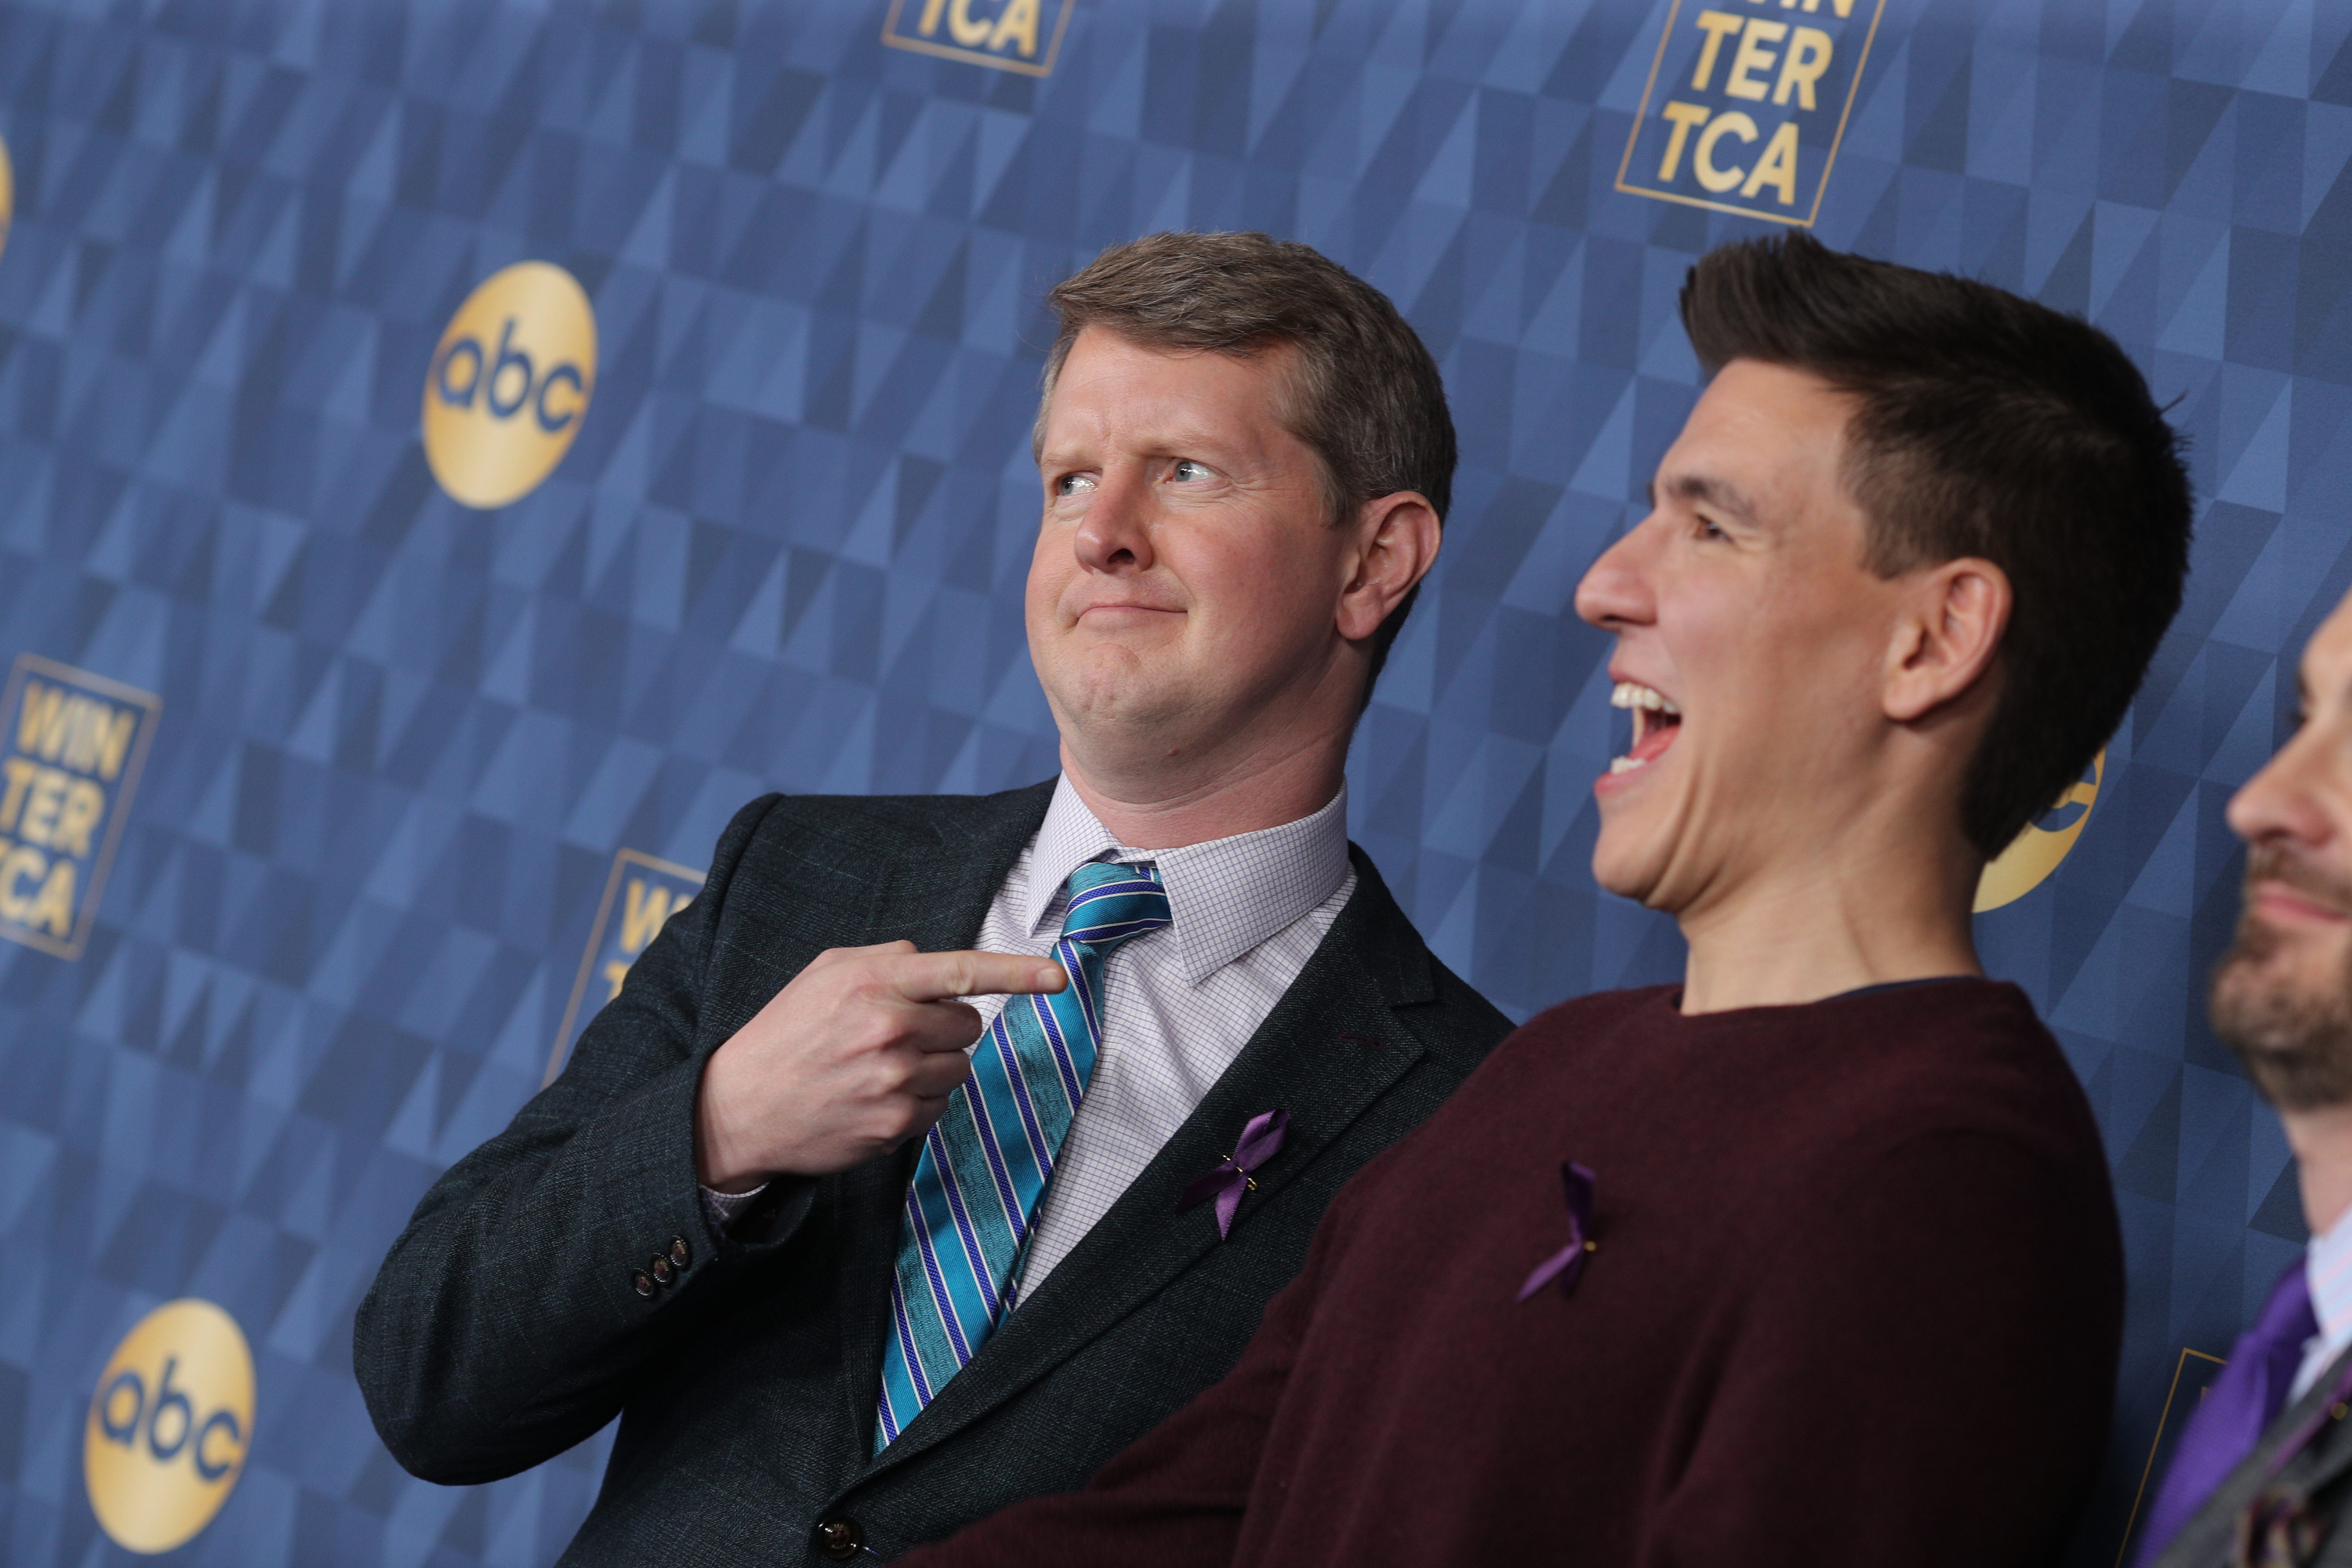 'Jeopardy!' GOAT Ken Jennings and former champ James Holzhauer 